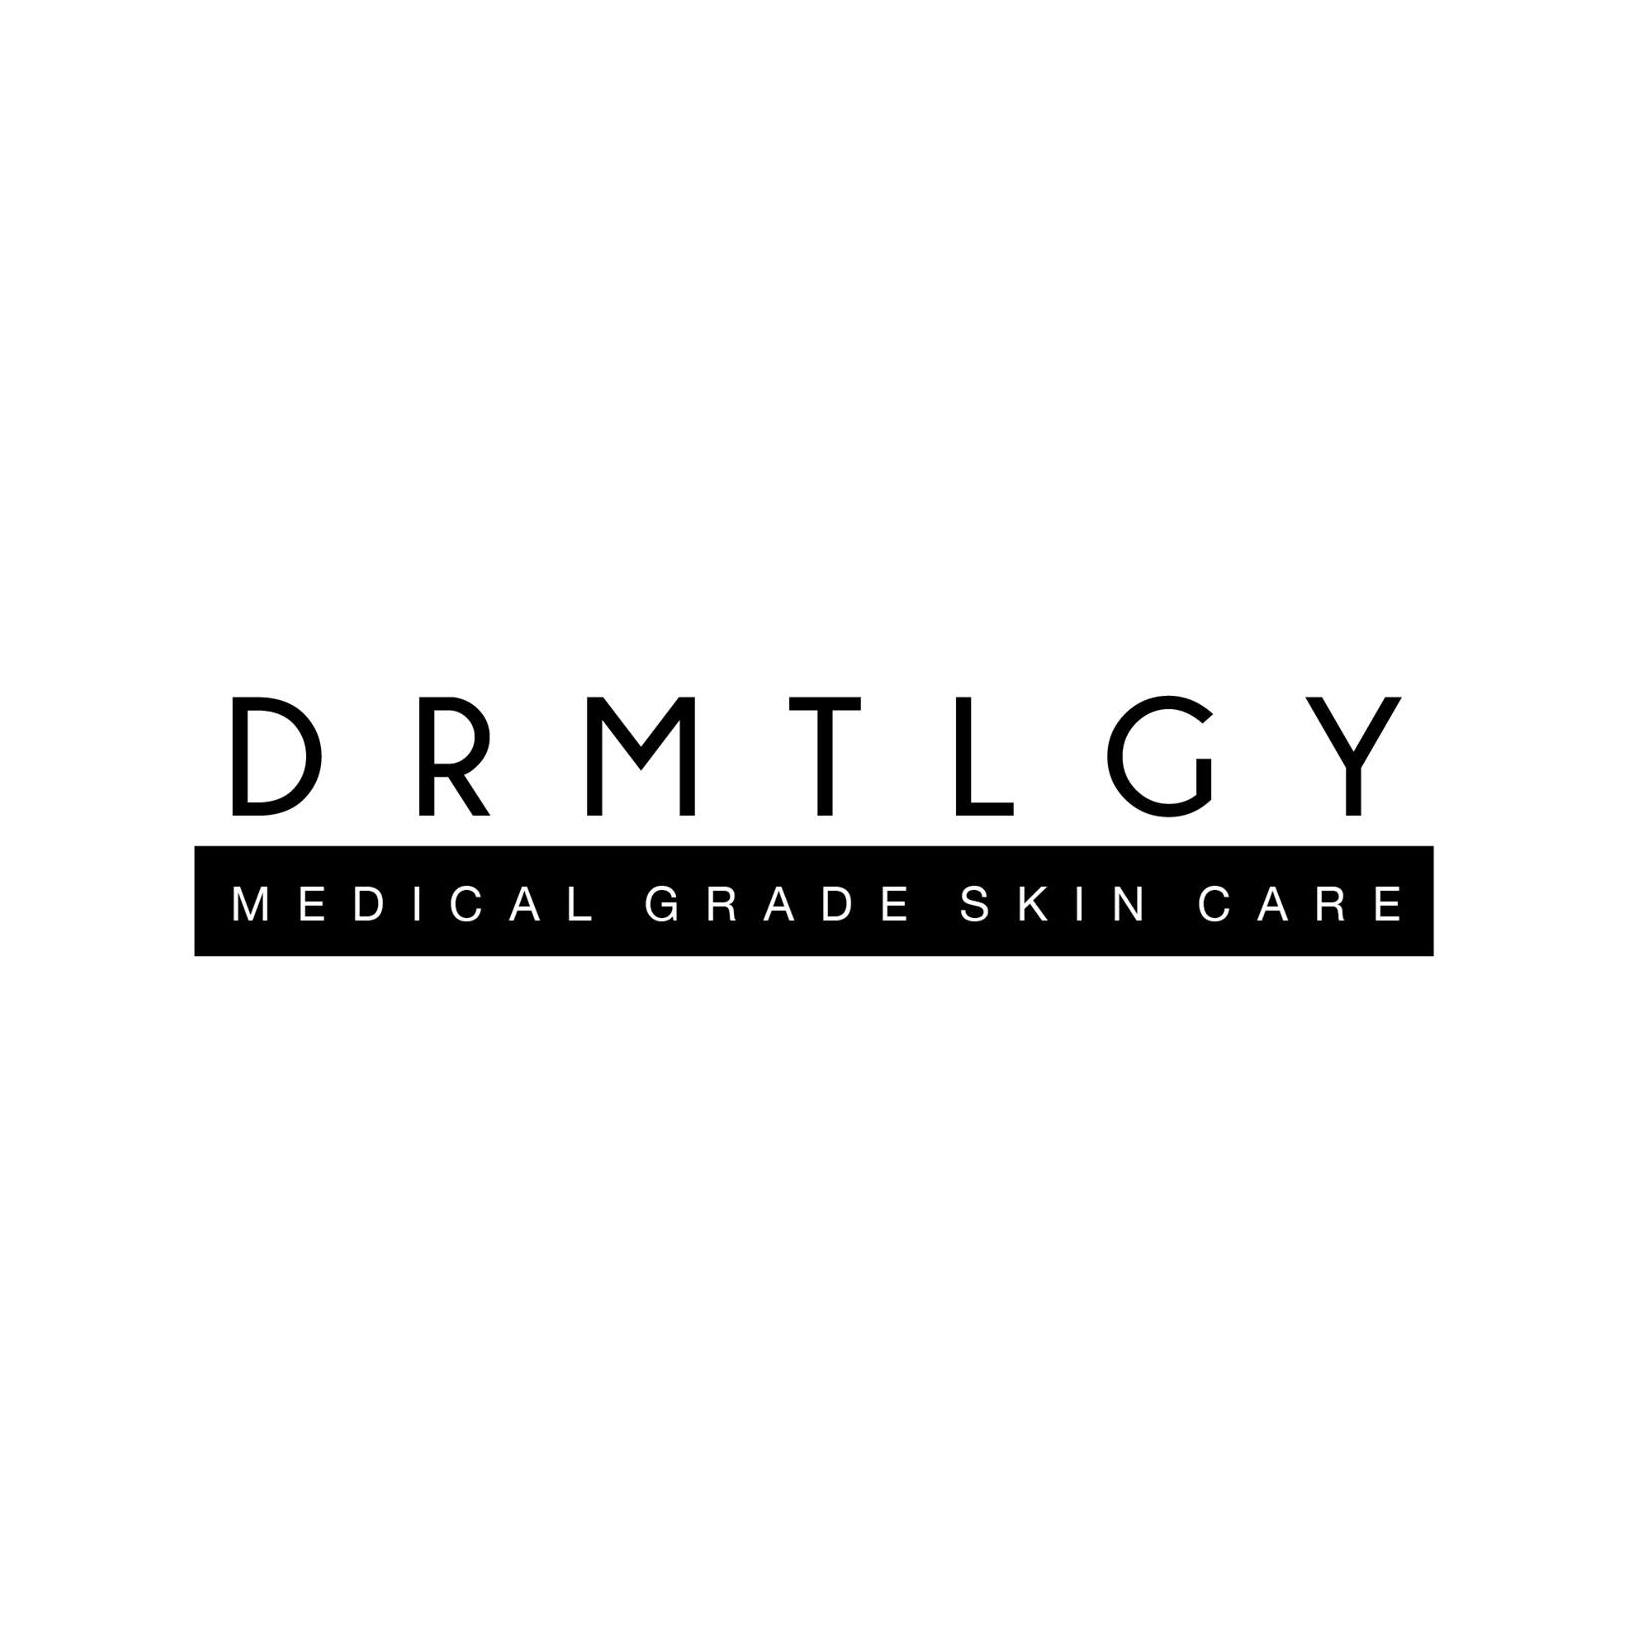 DRMTLGY Coupons